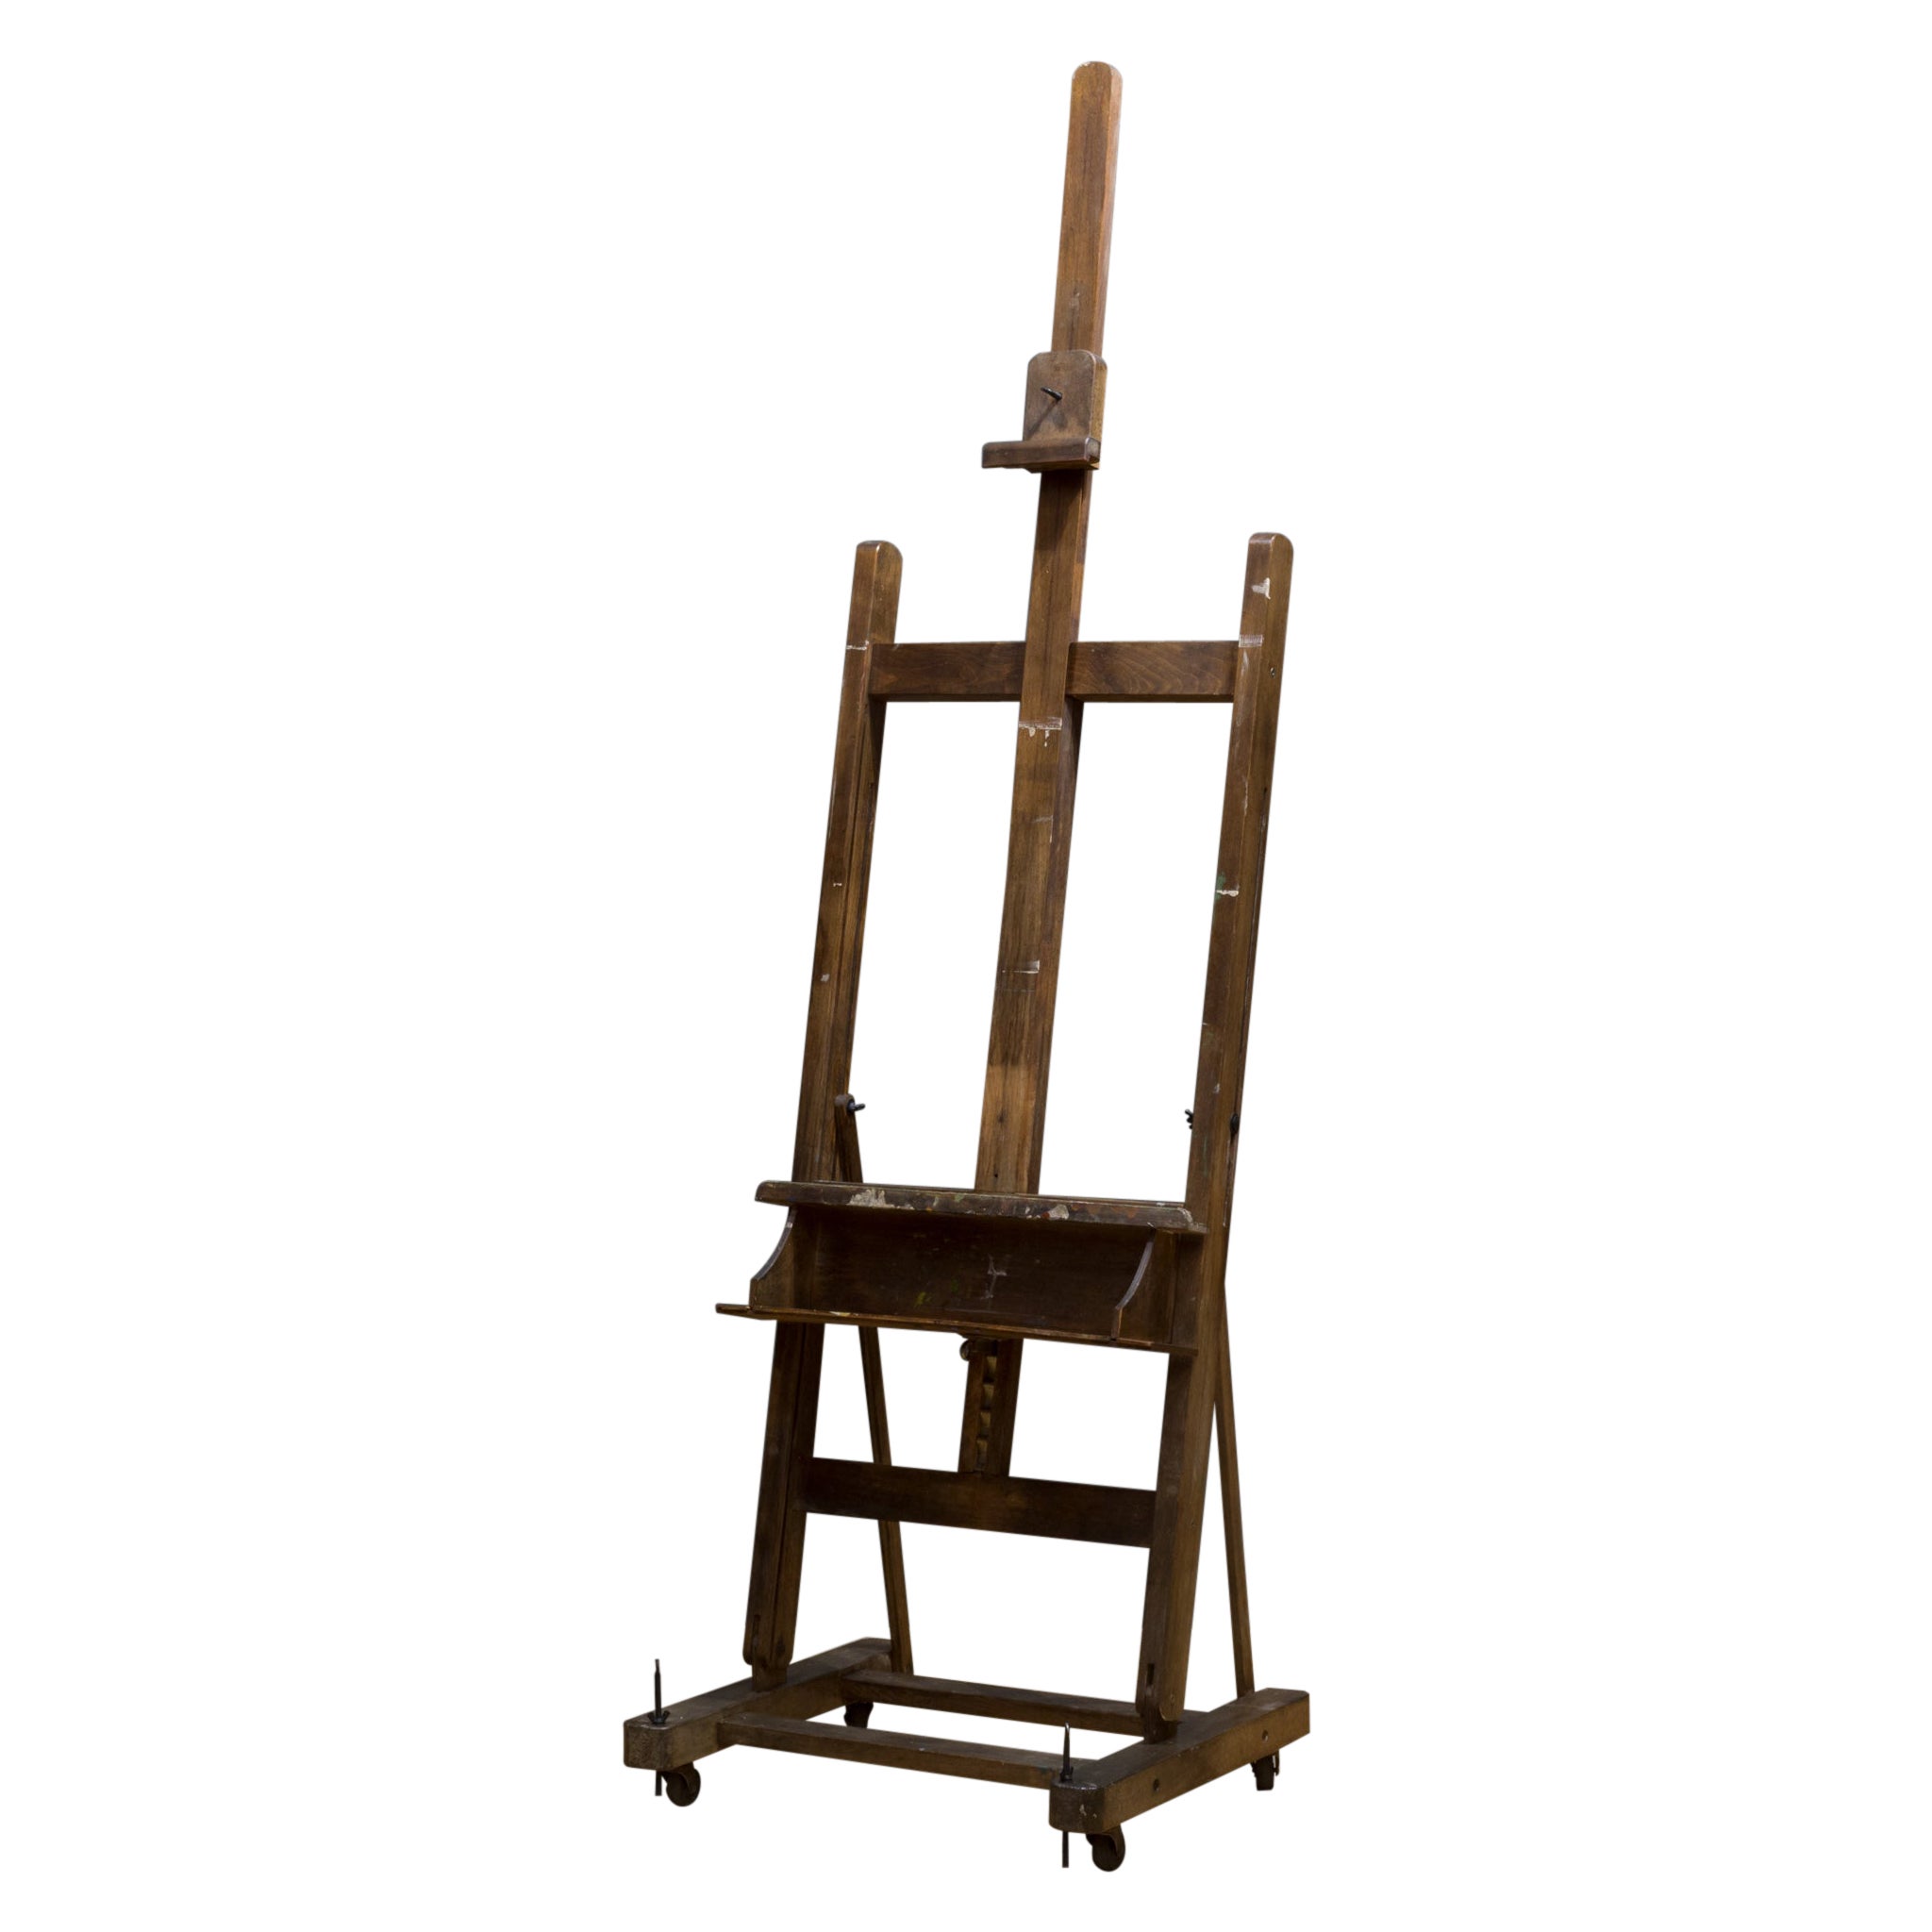 Early-Mid 20th c. Collapsible Artist's Easel c.1940-1950 at